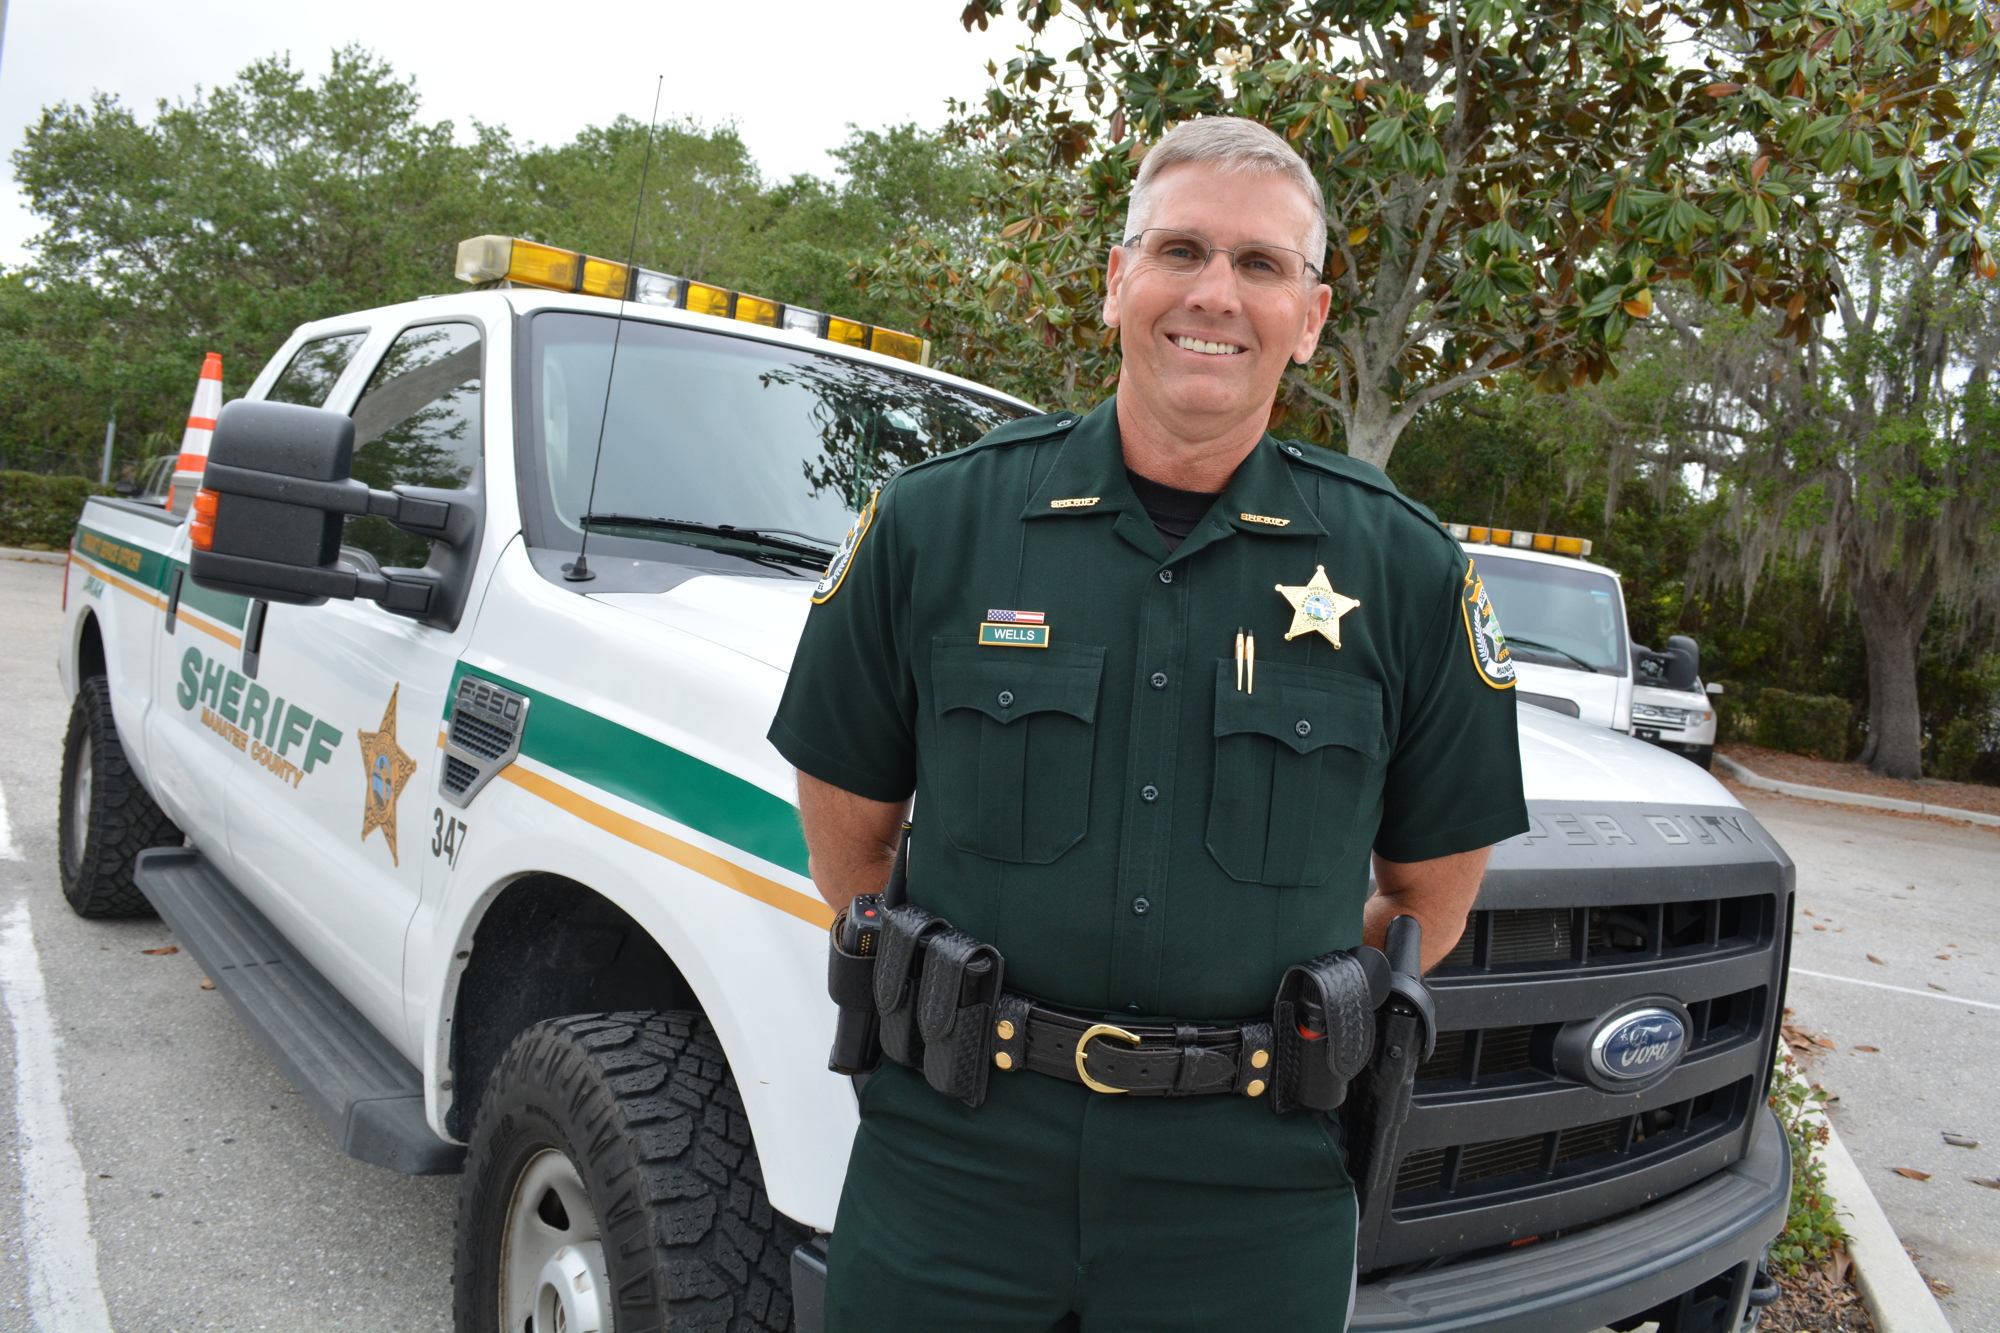 Manatee County Sheriff Rick Wells says he hopes to get 20 more patrol deputies in the next five years so he can create a new patrol district to cover the Lakewood Ranch area specifically. File photo.